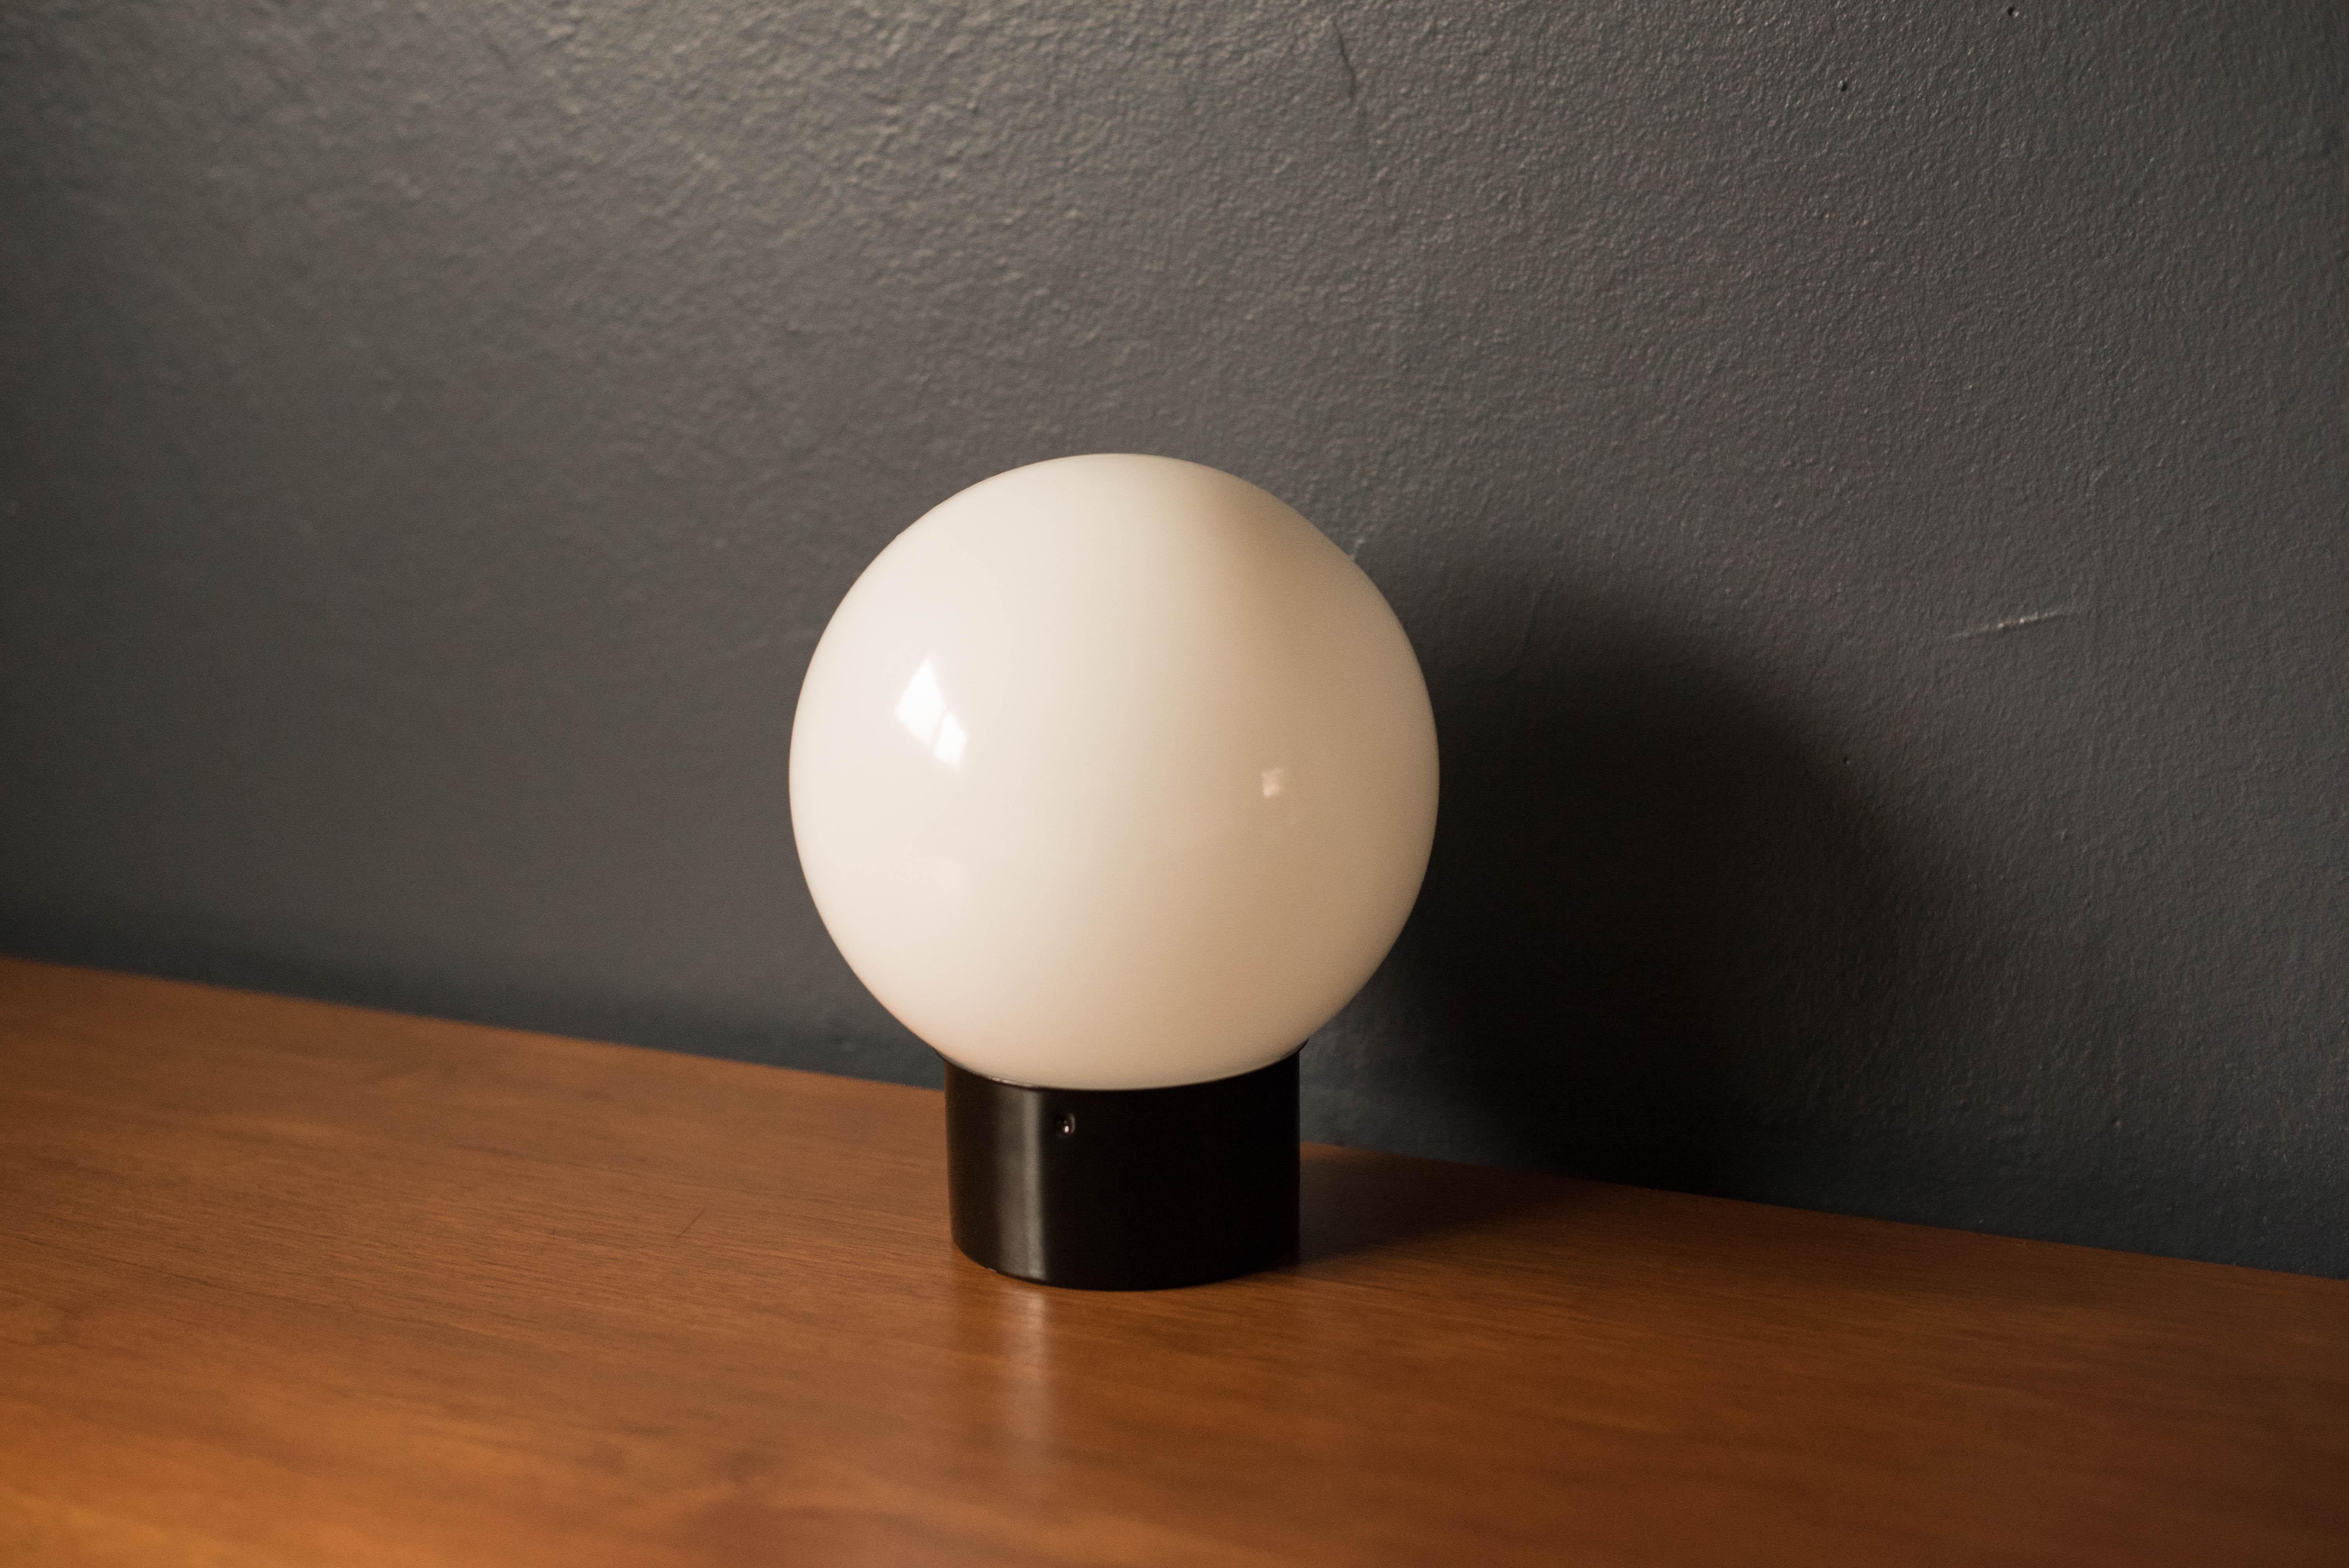 Vintage pop art mod lamp, circa 1970s. Round glass globe sits on a black cylinder base and emits a glowing light. Recommended to use as a table lamp for an office desk or accessorize any home decor.

   